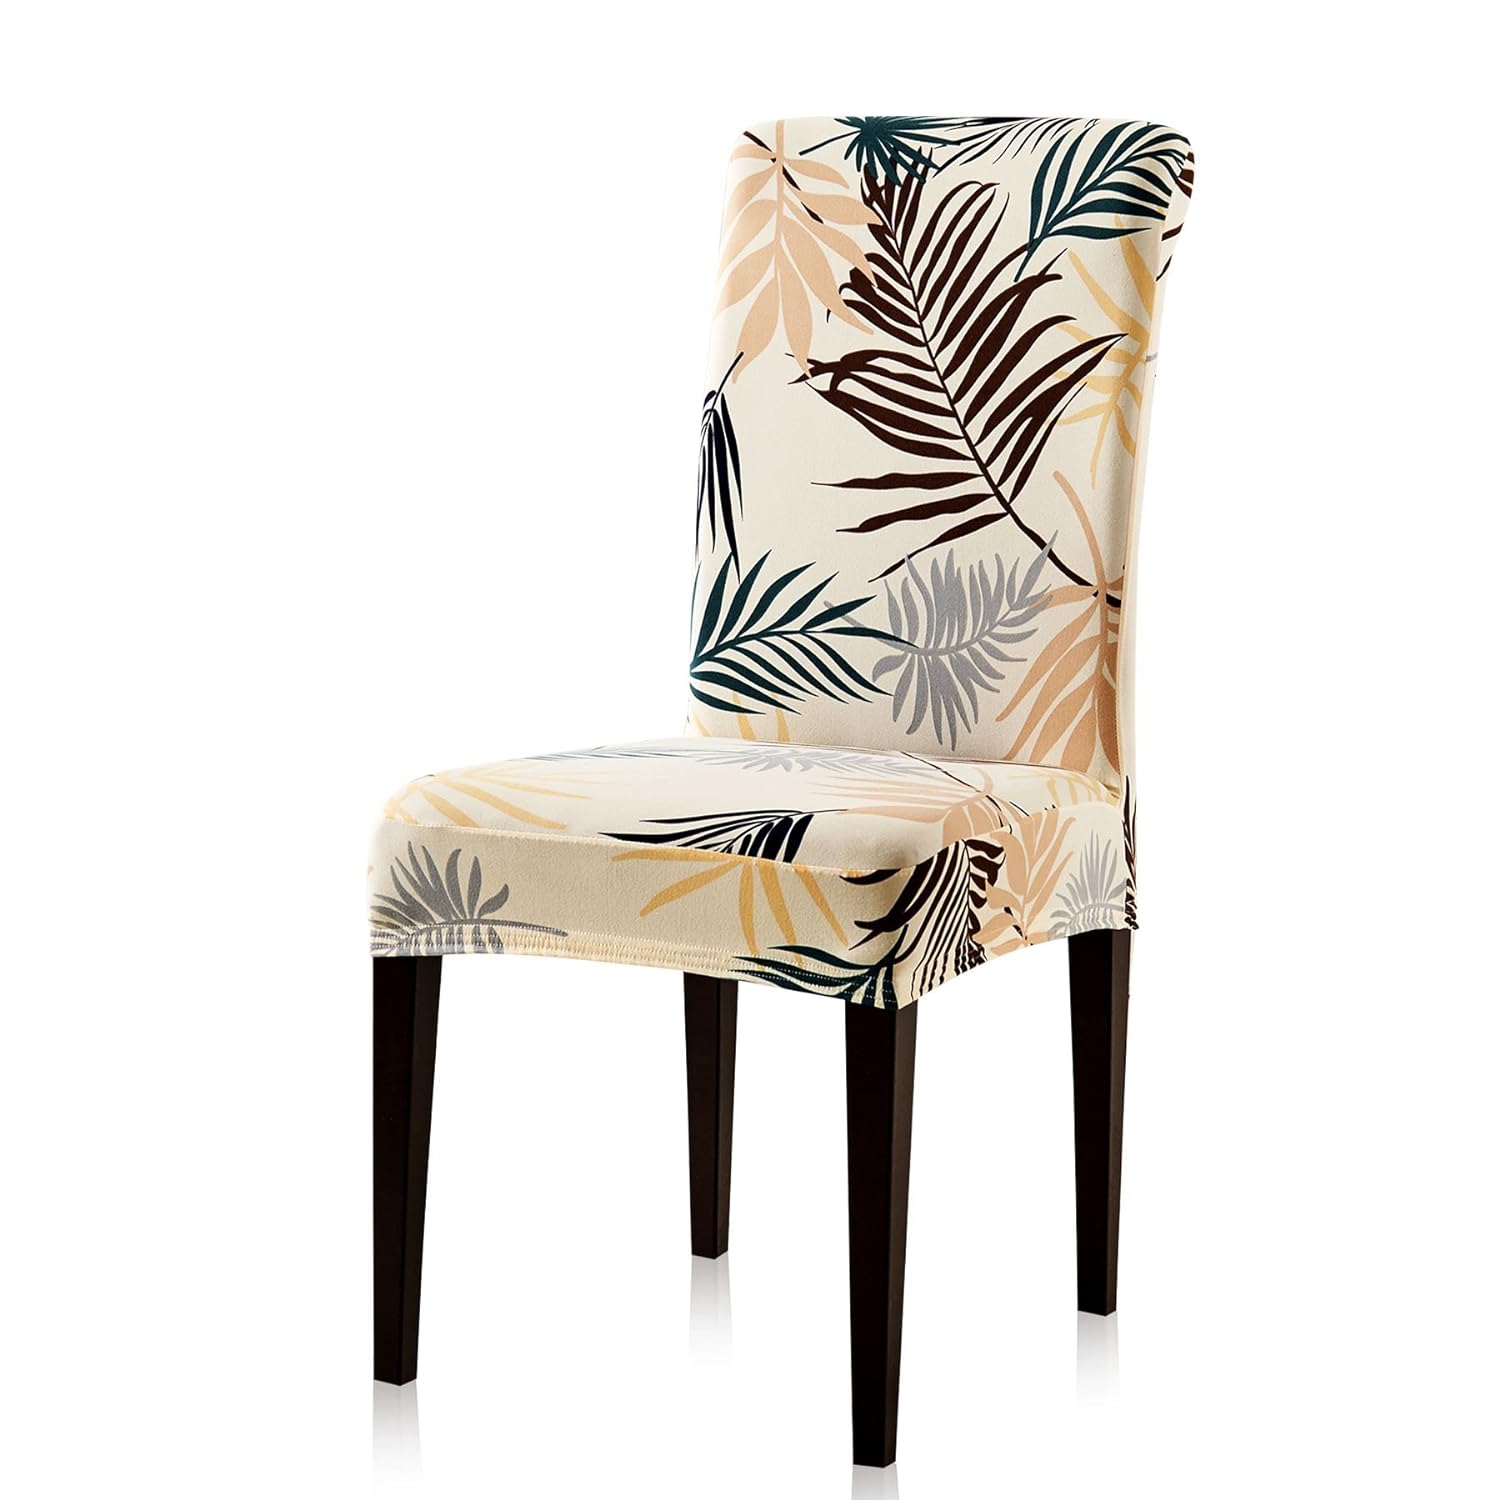 Subrtex Printed Leaf Stretchable Dining, Animal Print Parson Chair Slipcovers